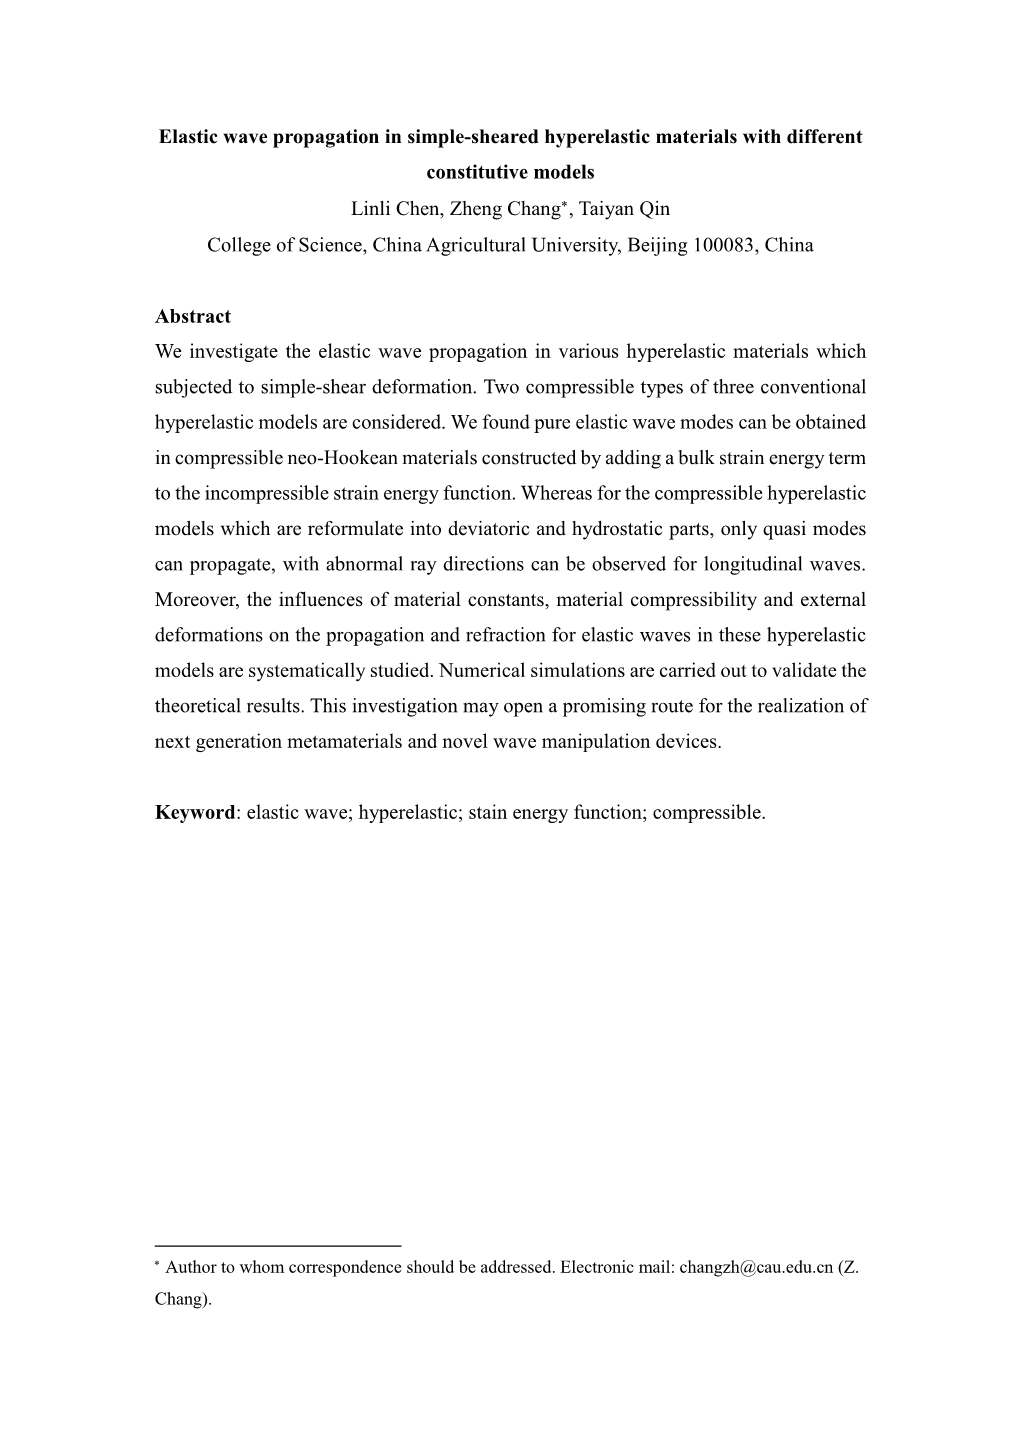 Elastic Wave Propagation in Simple-Sheared Hyperelastic Materials with Different Constitutive Models Linli Chen, Zheng Chang